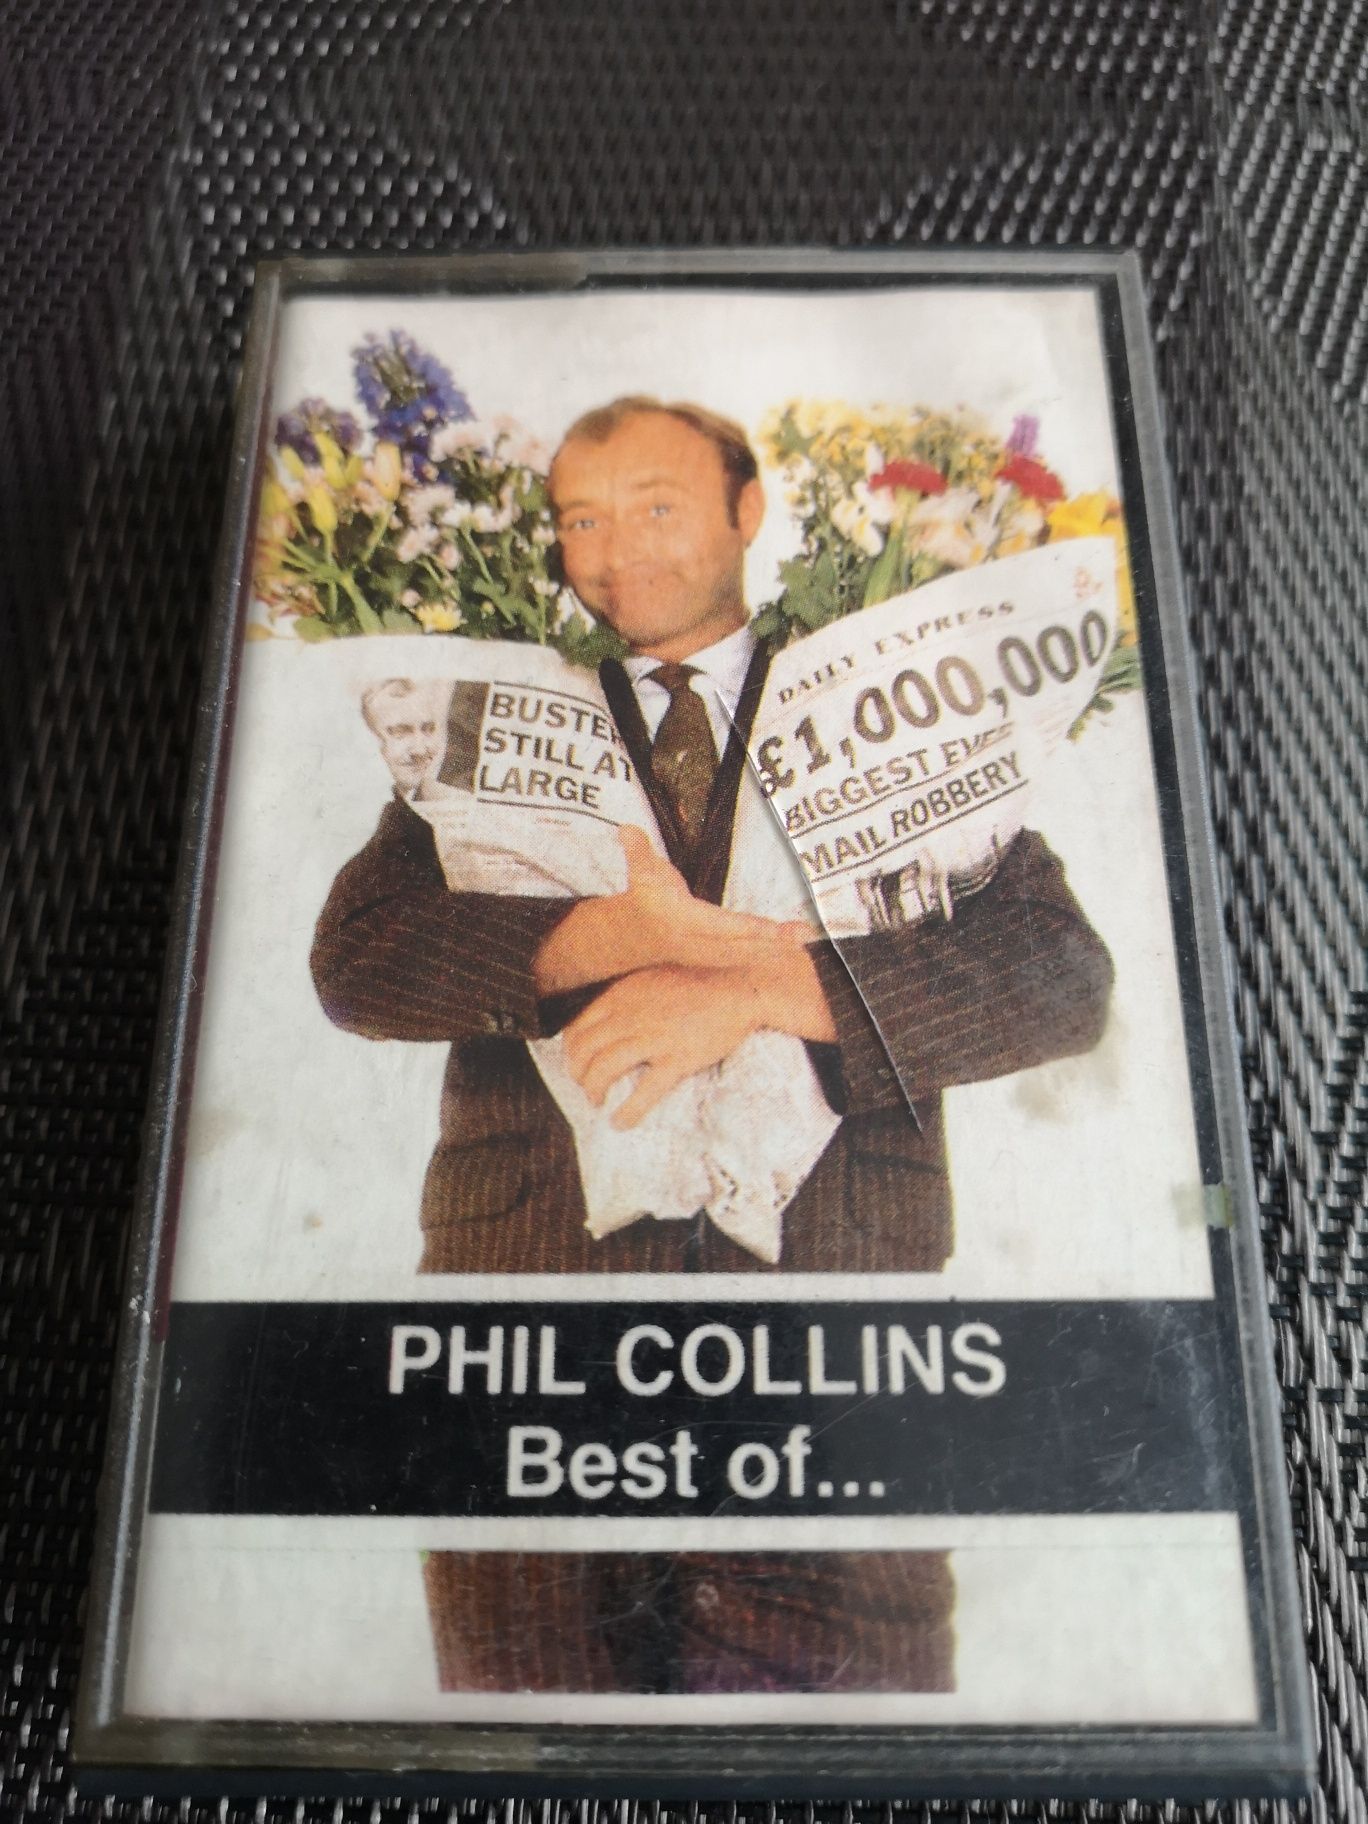 Phil Collins - The best of - 1997